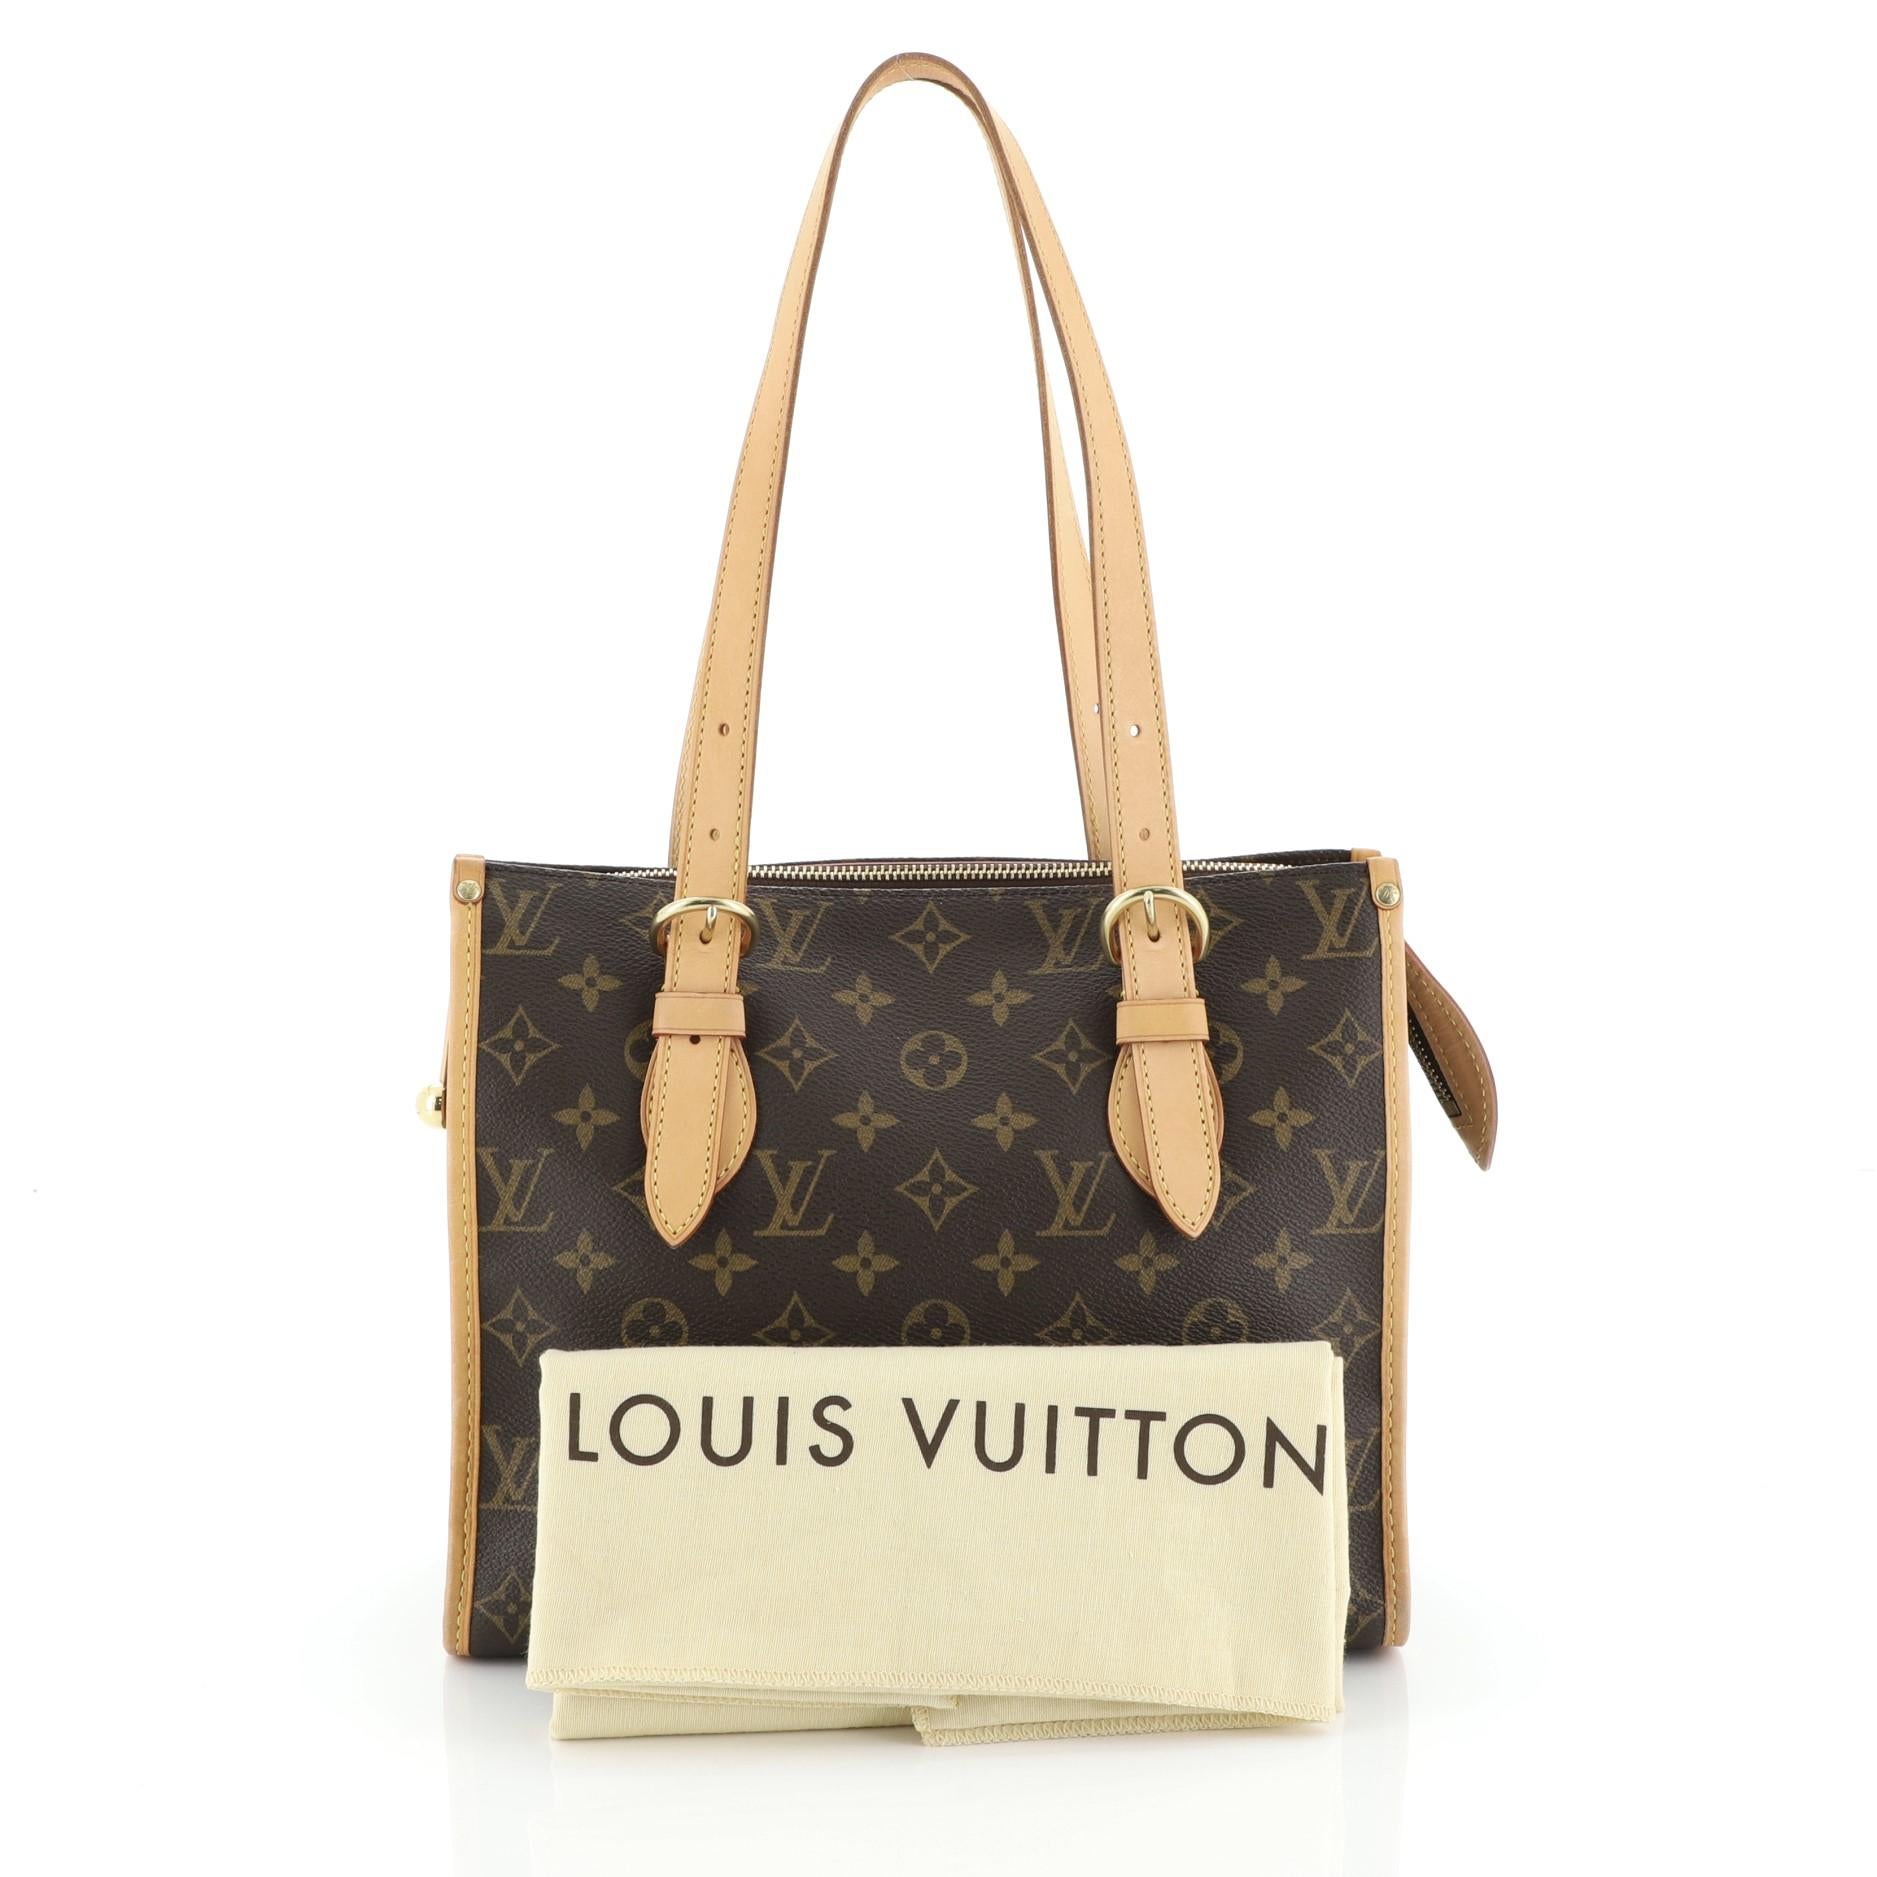 This Louis Vuitton Popincourt Tote Monogram Canvas Haut, crafted from brown monogram coated canvas, features dual leather handles, cowhide leather trim, and gold-tone hardware. Its zip closure opens to a brown fabric interior with slip pockets.